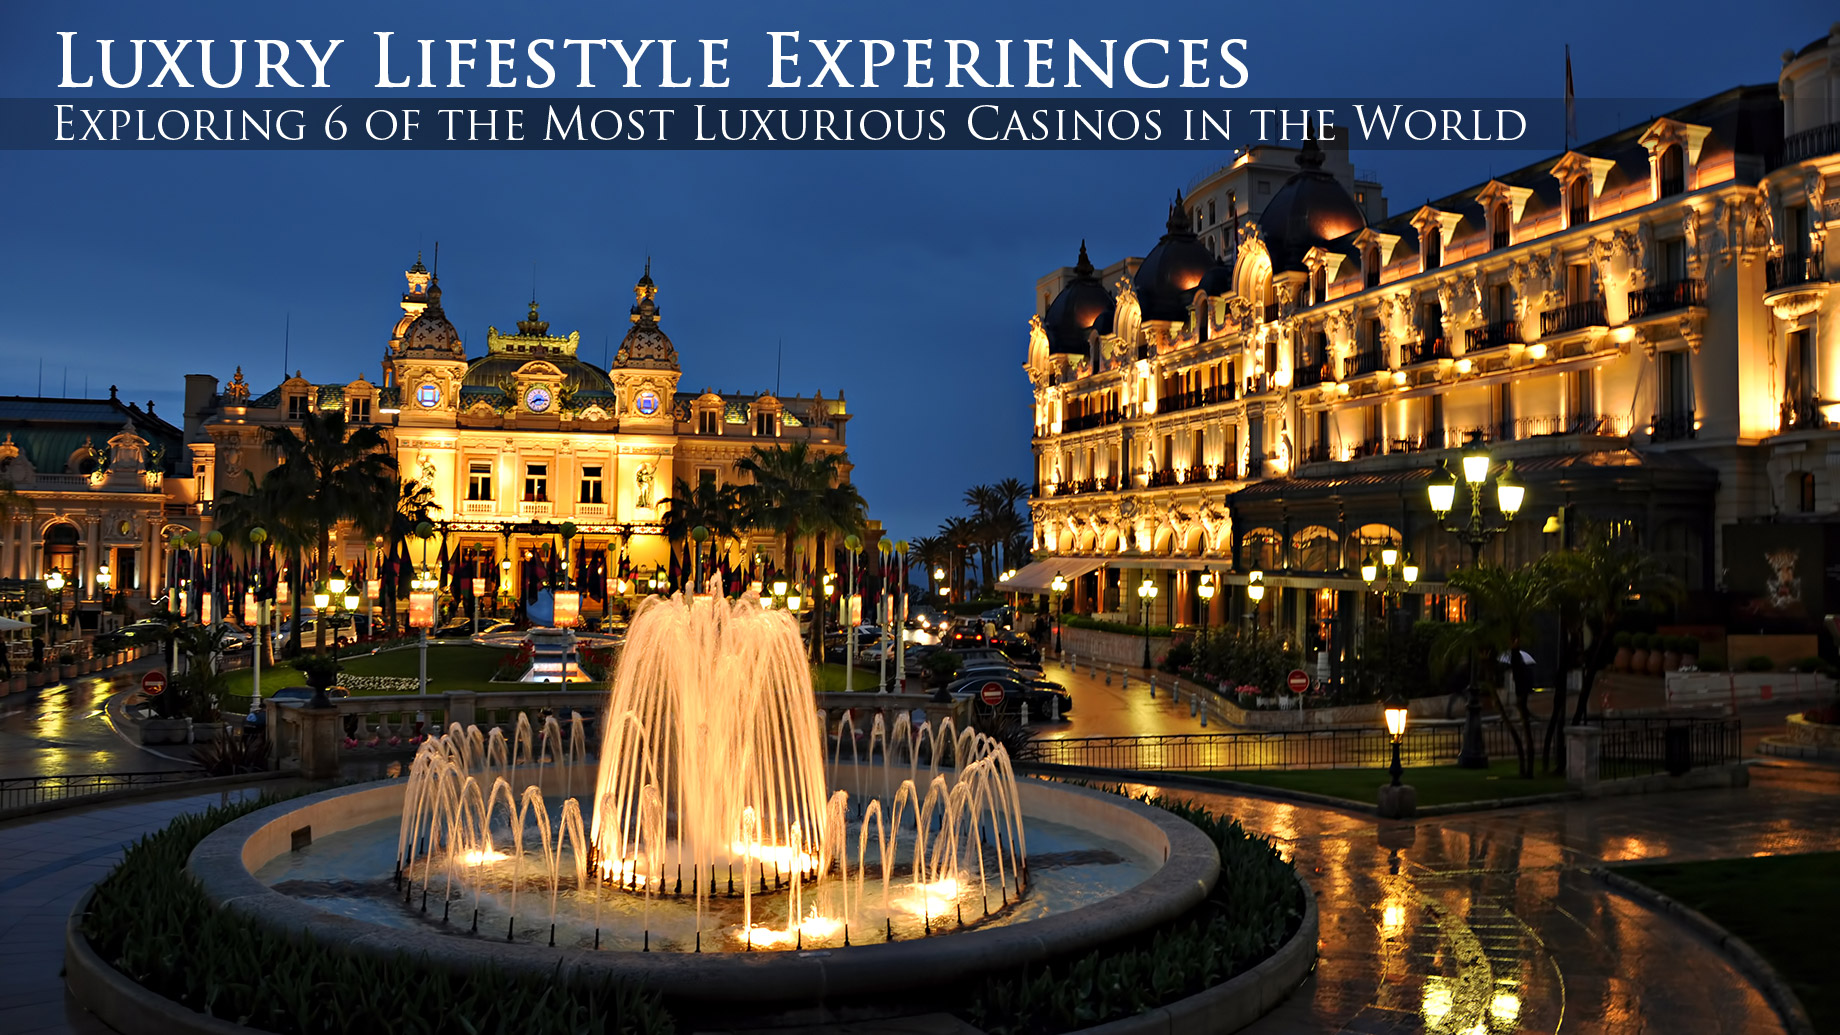 Luxury Lifestyle Experiences – Exploring 6 of the Most Luxurious